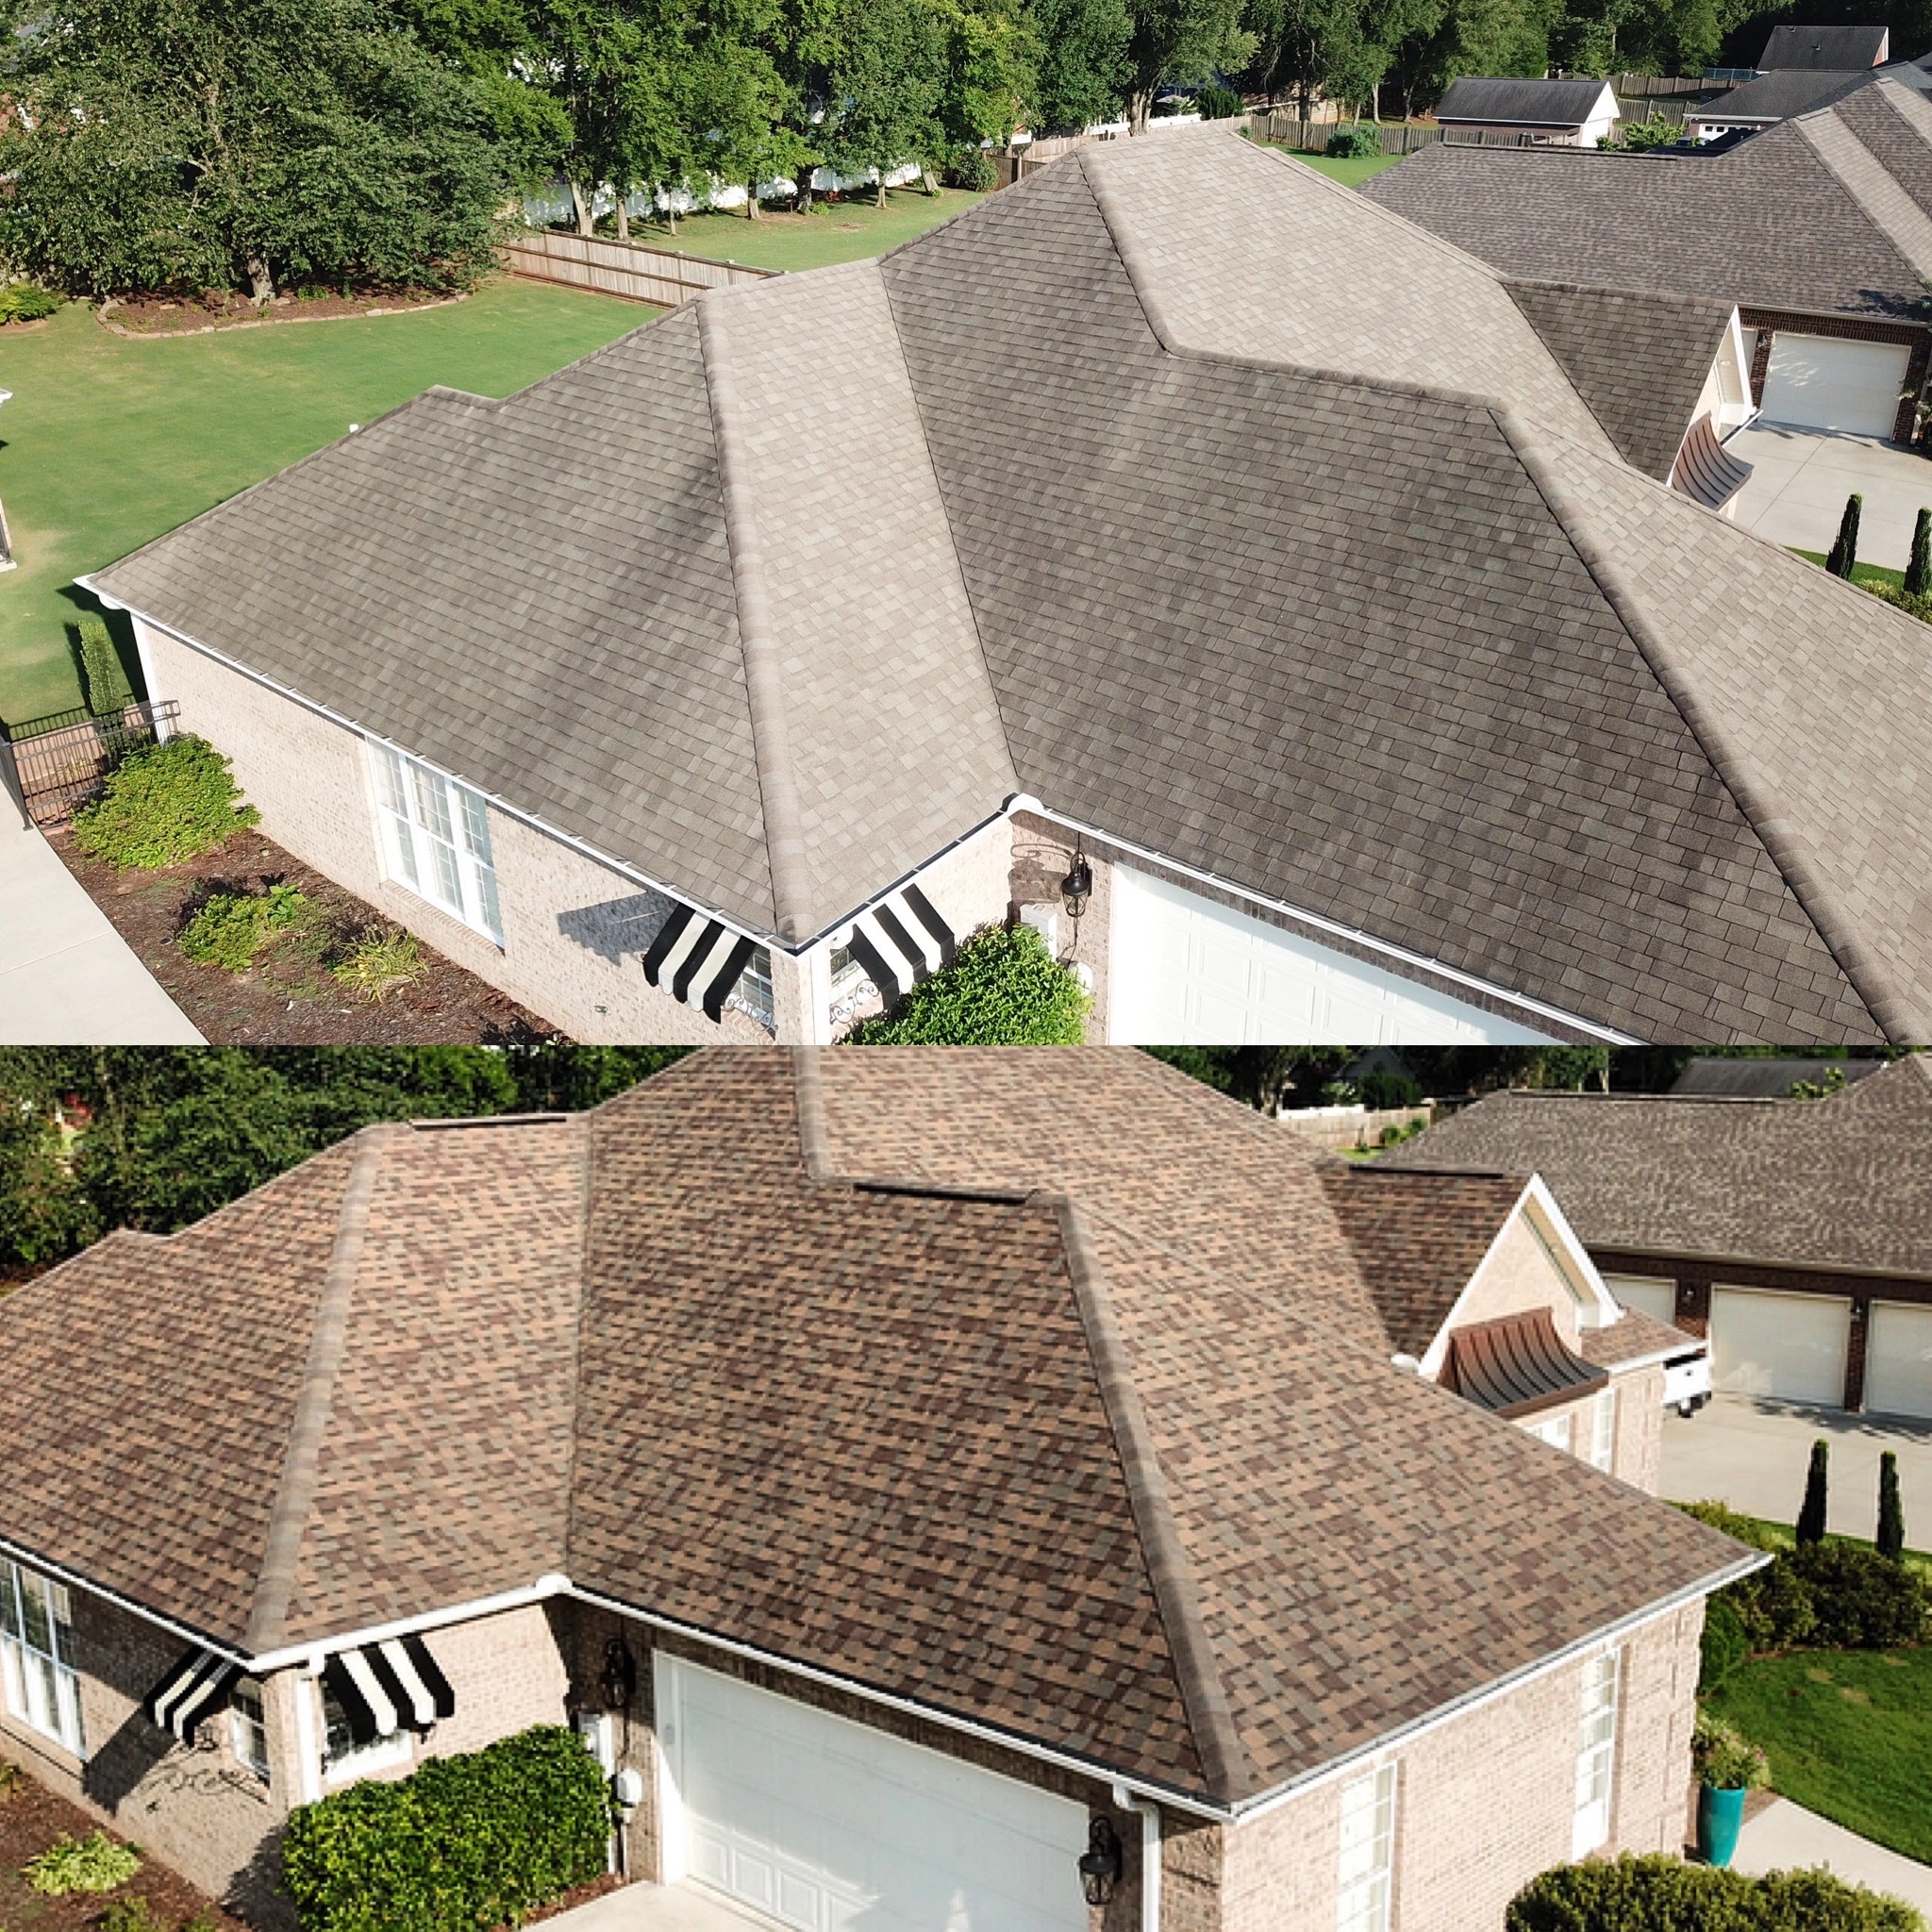 Before and After a shingle roof replacement in Alabama.